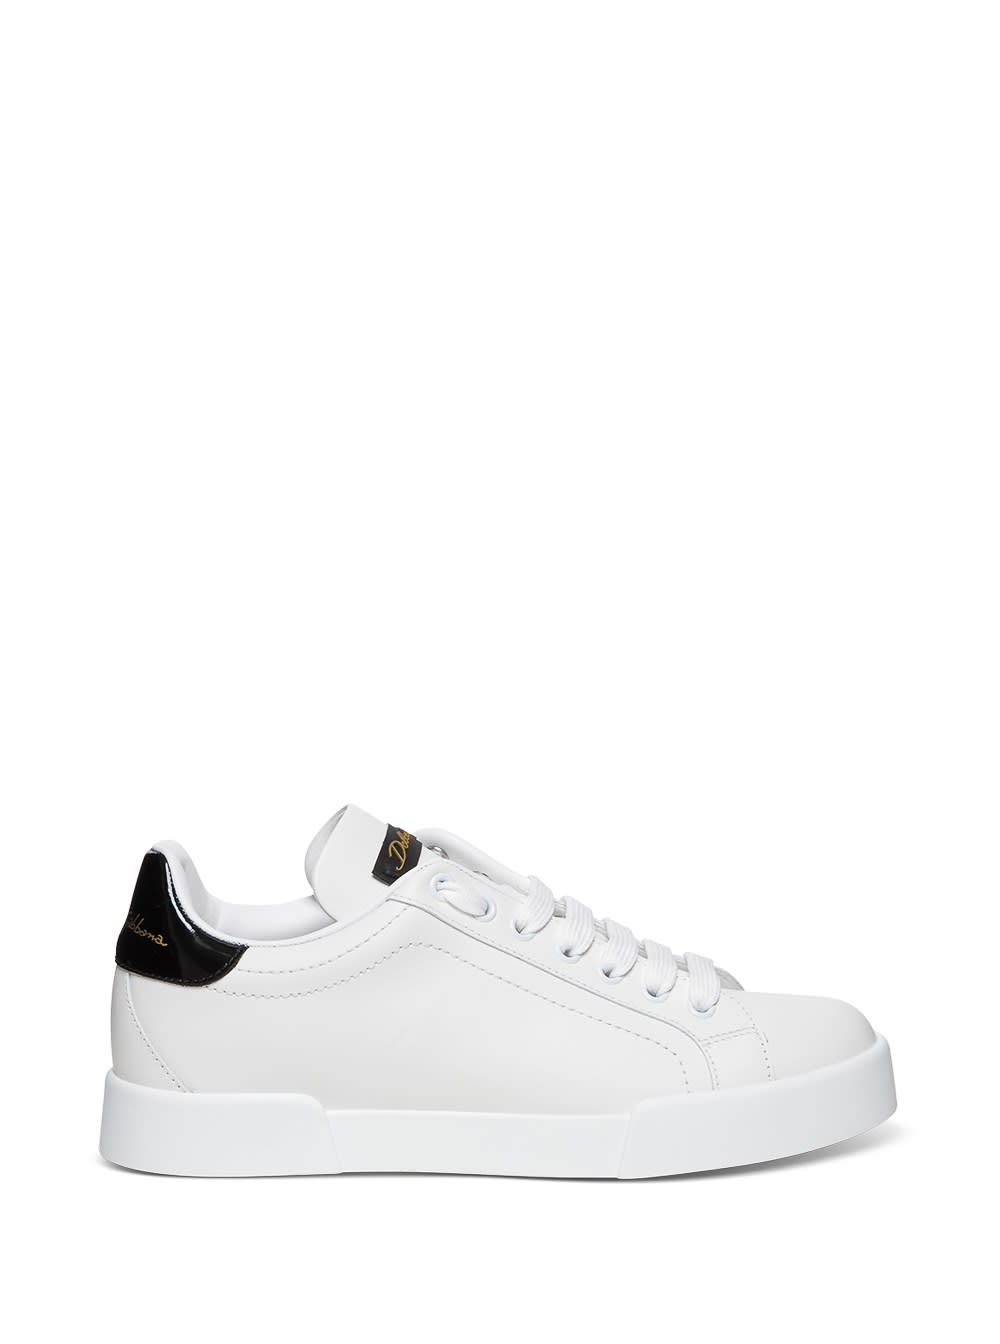 Buy Dolce & Gabbana White Leather Sneakers With Logo online, shop Dolce & Gabbana shoes with free shipping